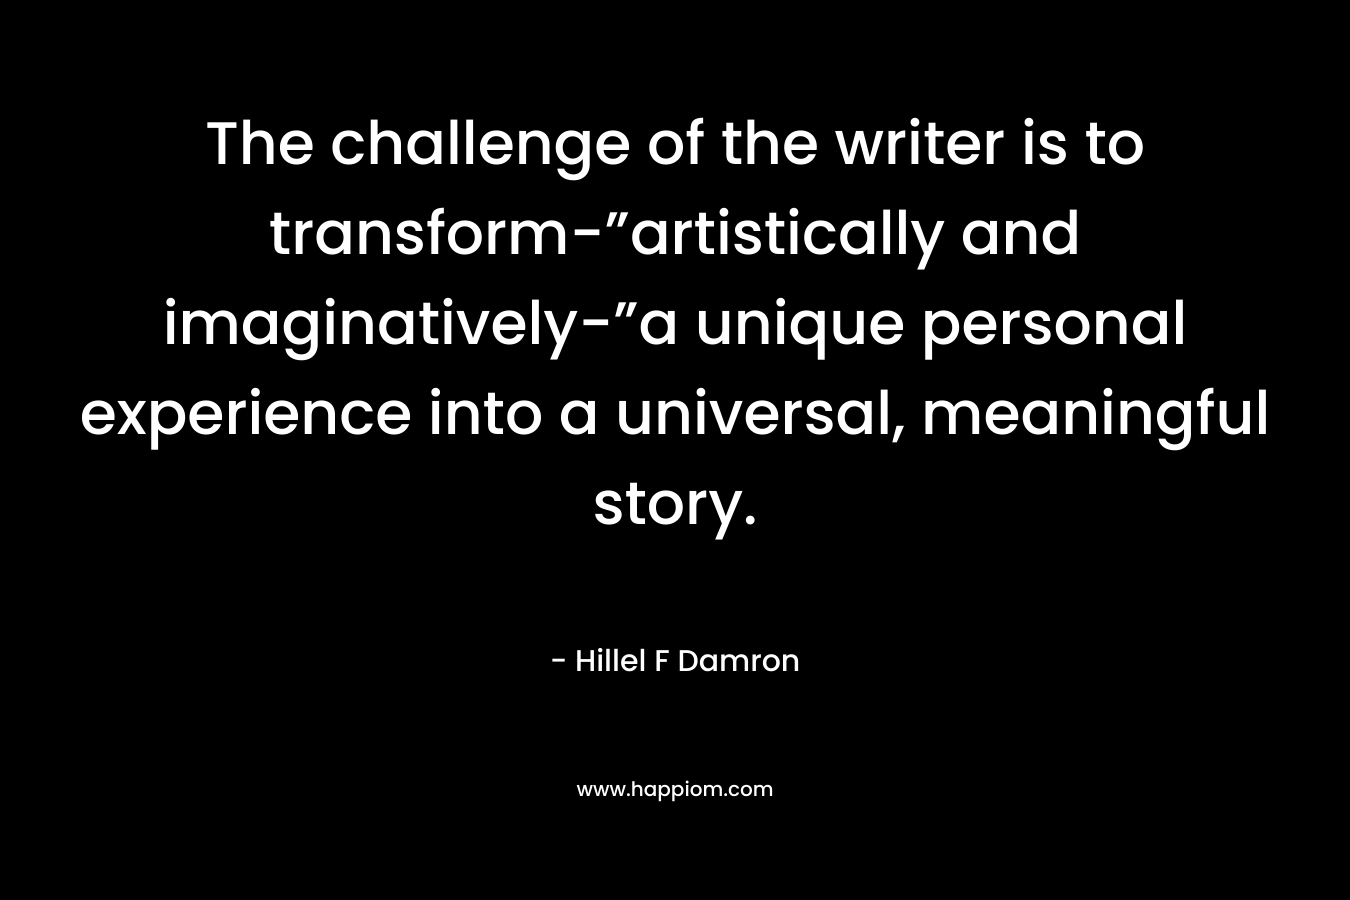 The challenge of the writer is to transform-”artistically and imaginatively-”a unique personal experience into a universal, meaningful story. – Hillel F Damron